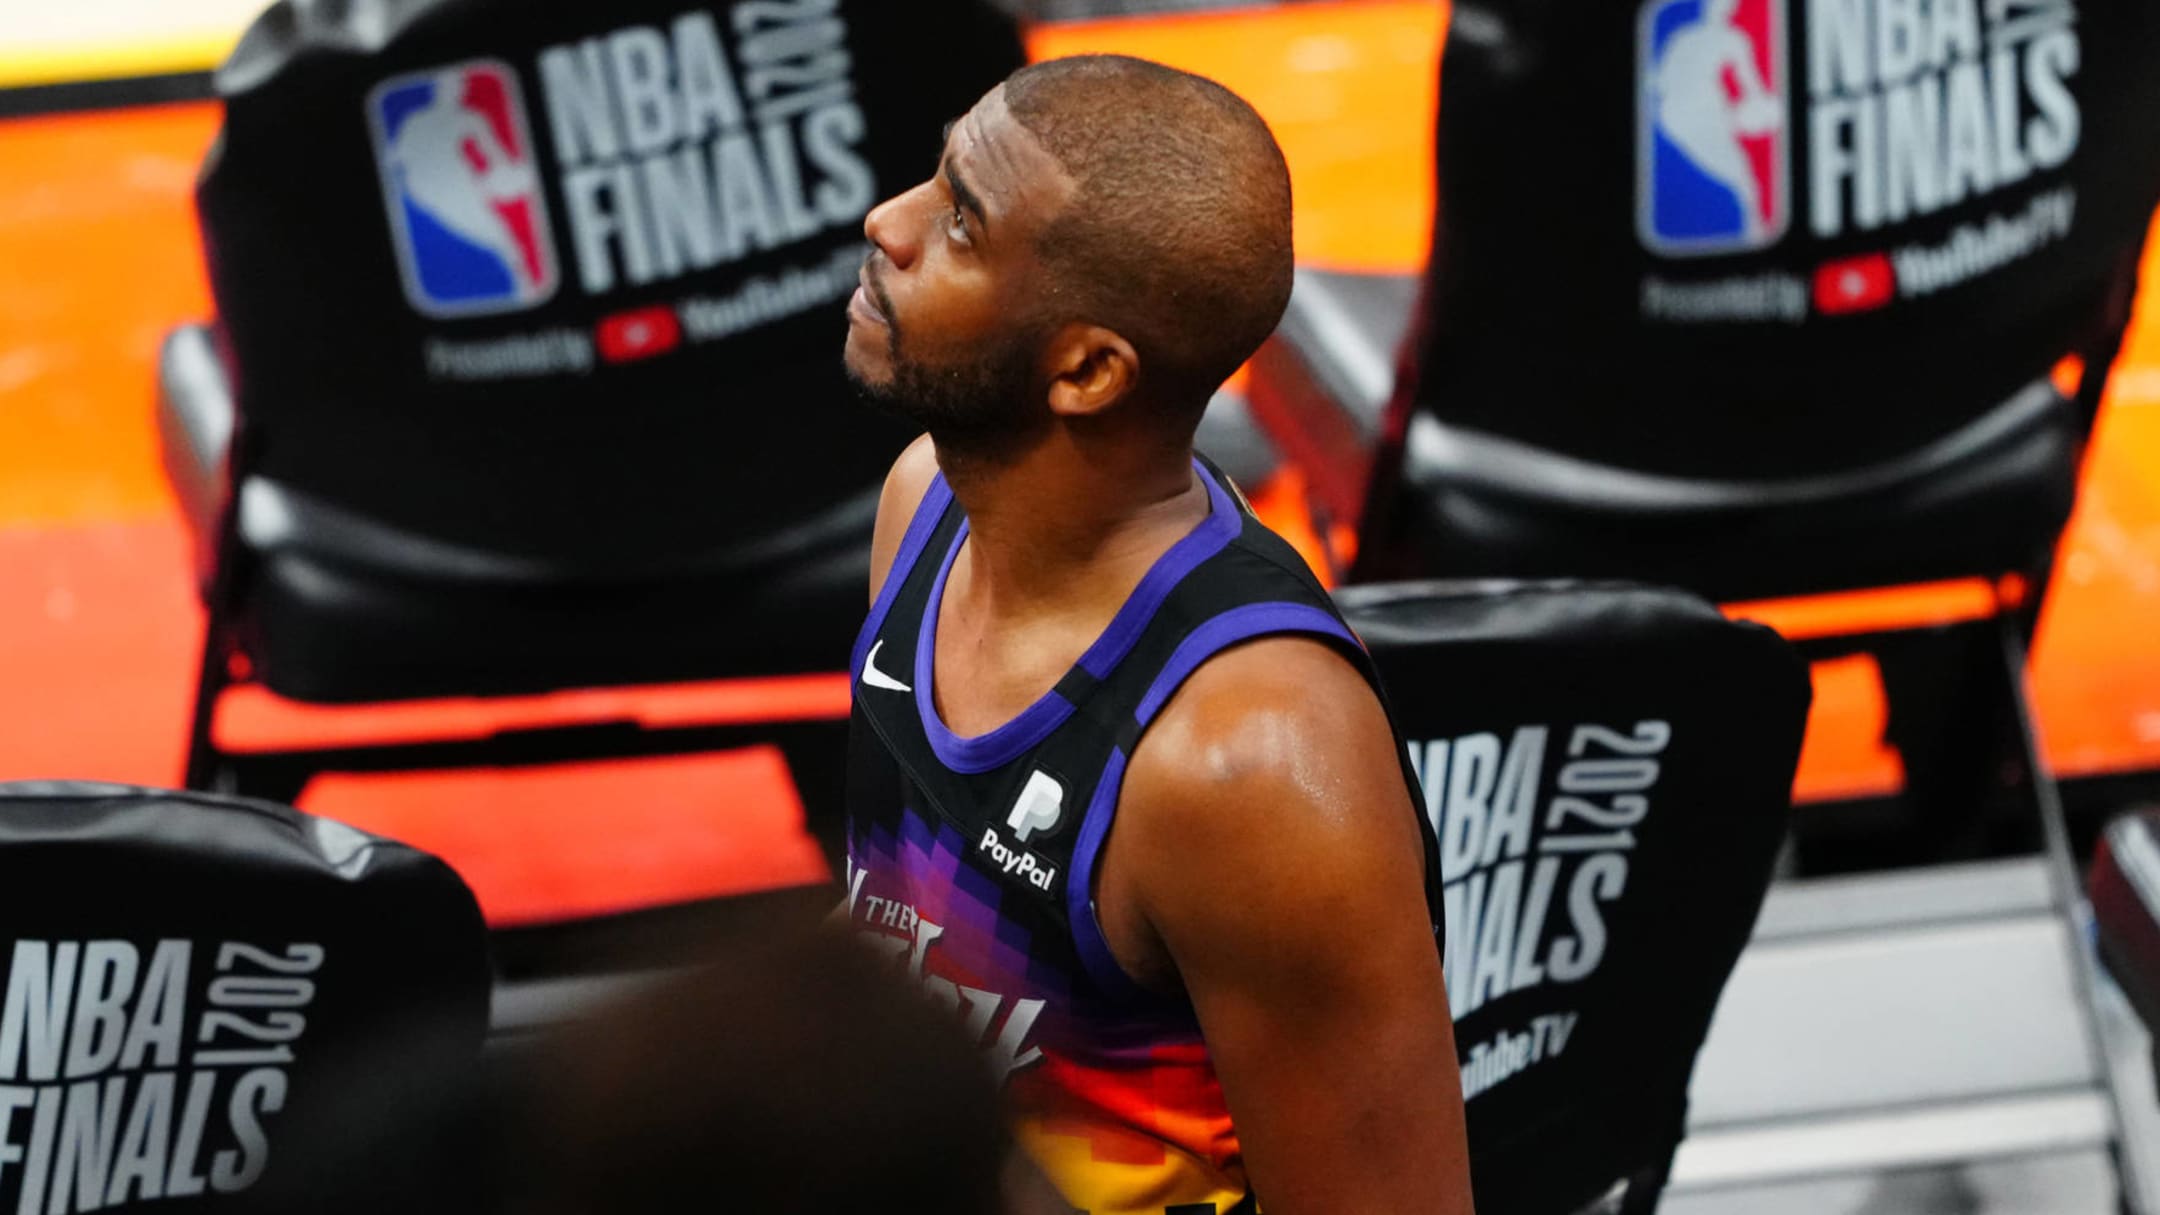 Chris Paul Says He is 'Not Retiring' After Season-Ending Blowout Loss